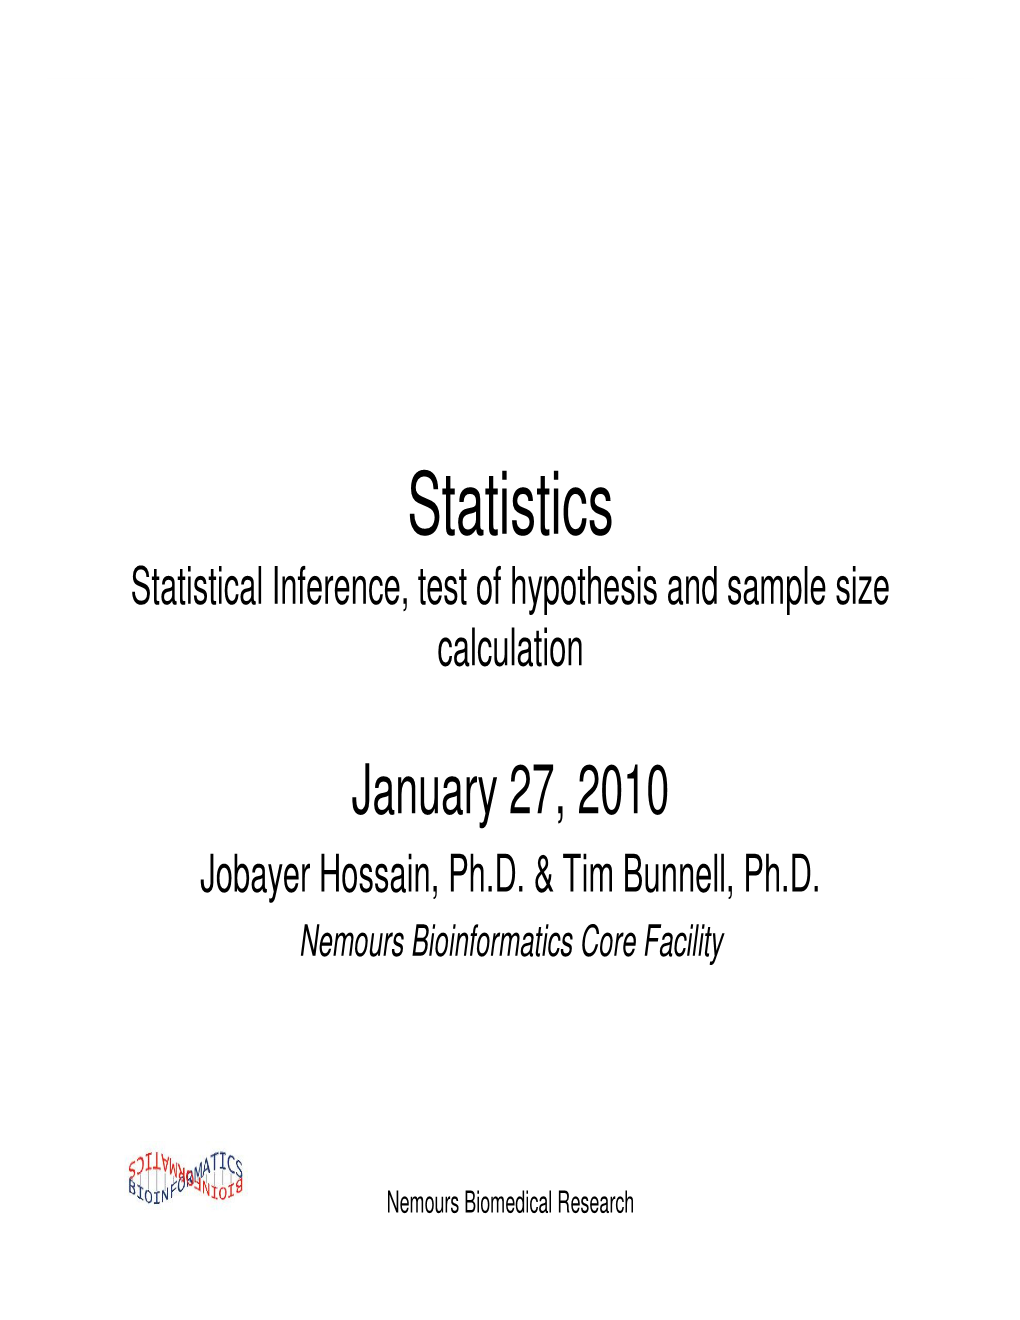 Statistics Statistical Inference, Test of Hypothesis and Sample Size Calculation